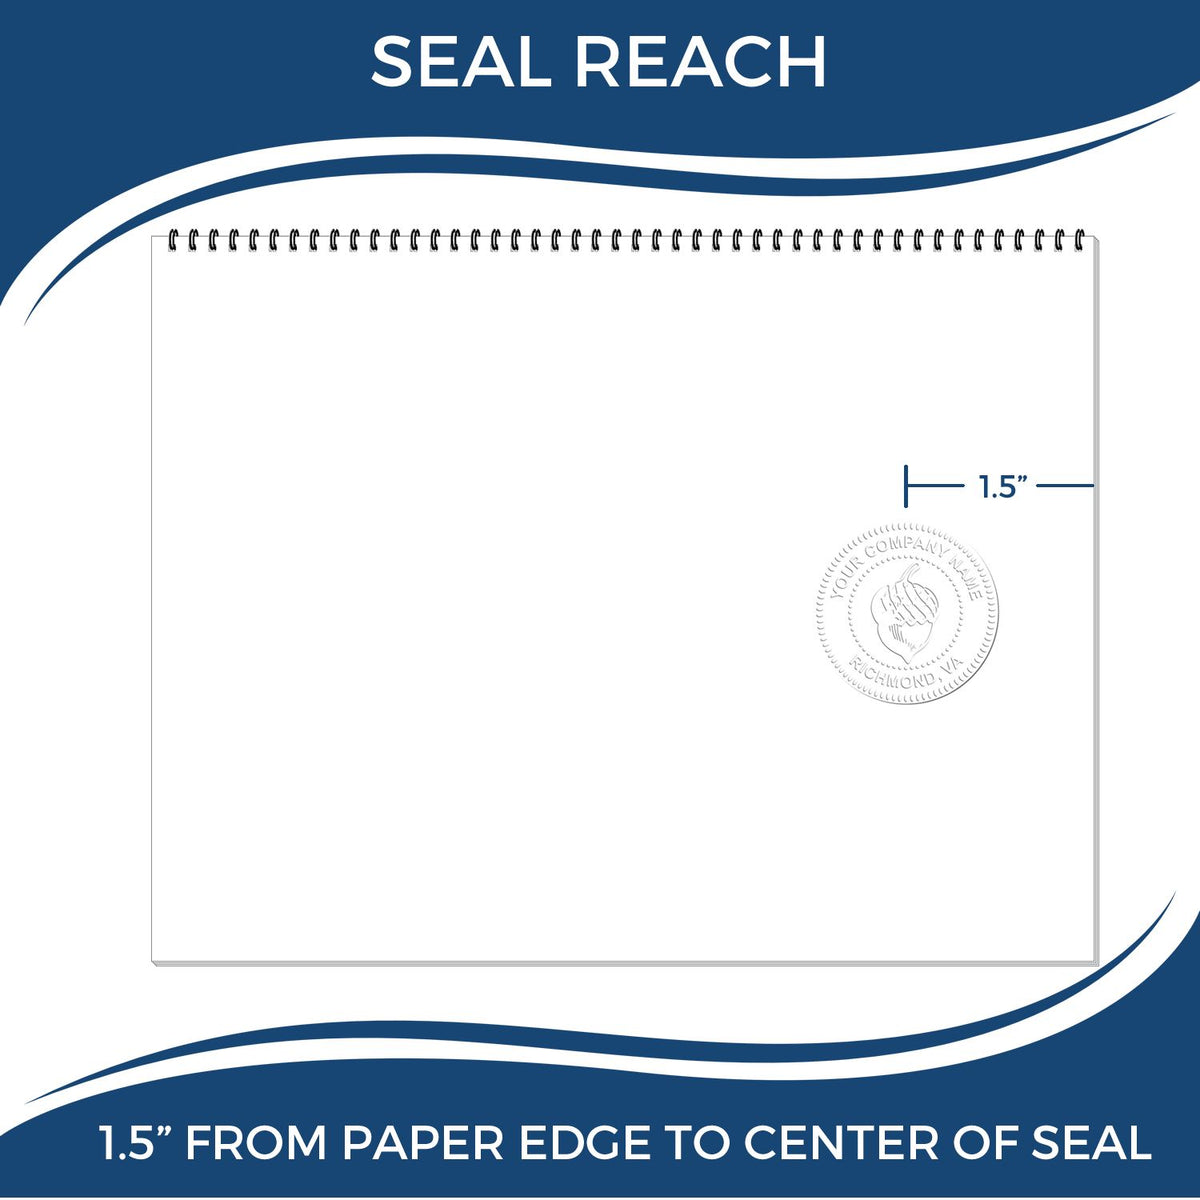 An infographic showing the seal reach which is represented by a ruler and a miniature seal image of the Soft Louisiana Professional Engineer Seal